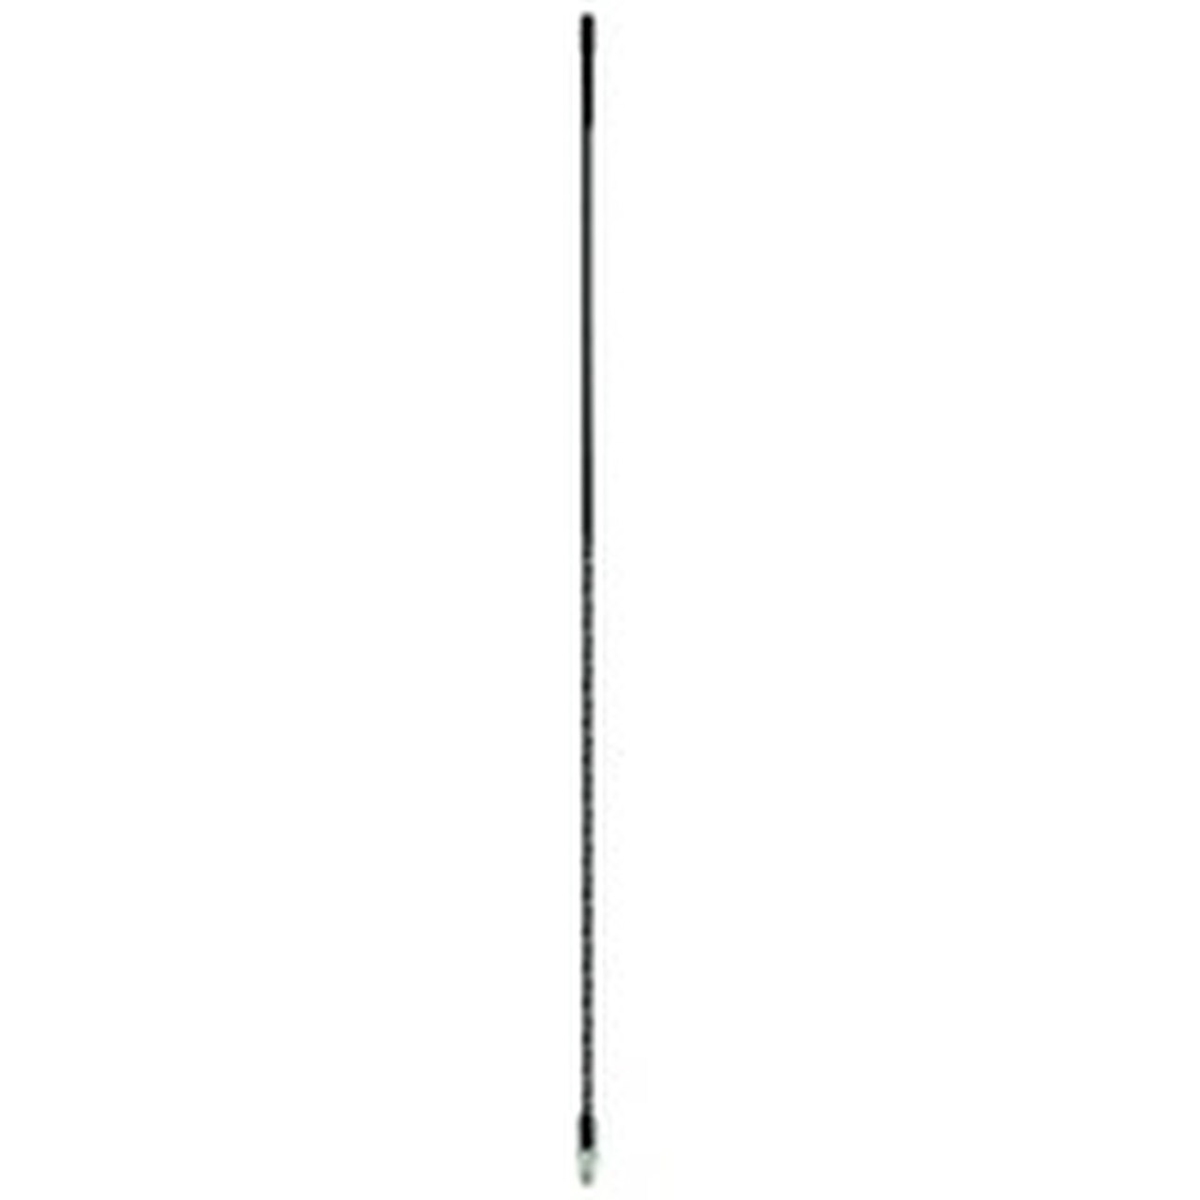 Picture of Procomm SF2B 2 ft. Flexi Whip, Black